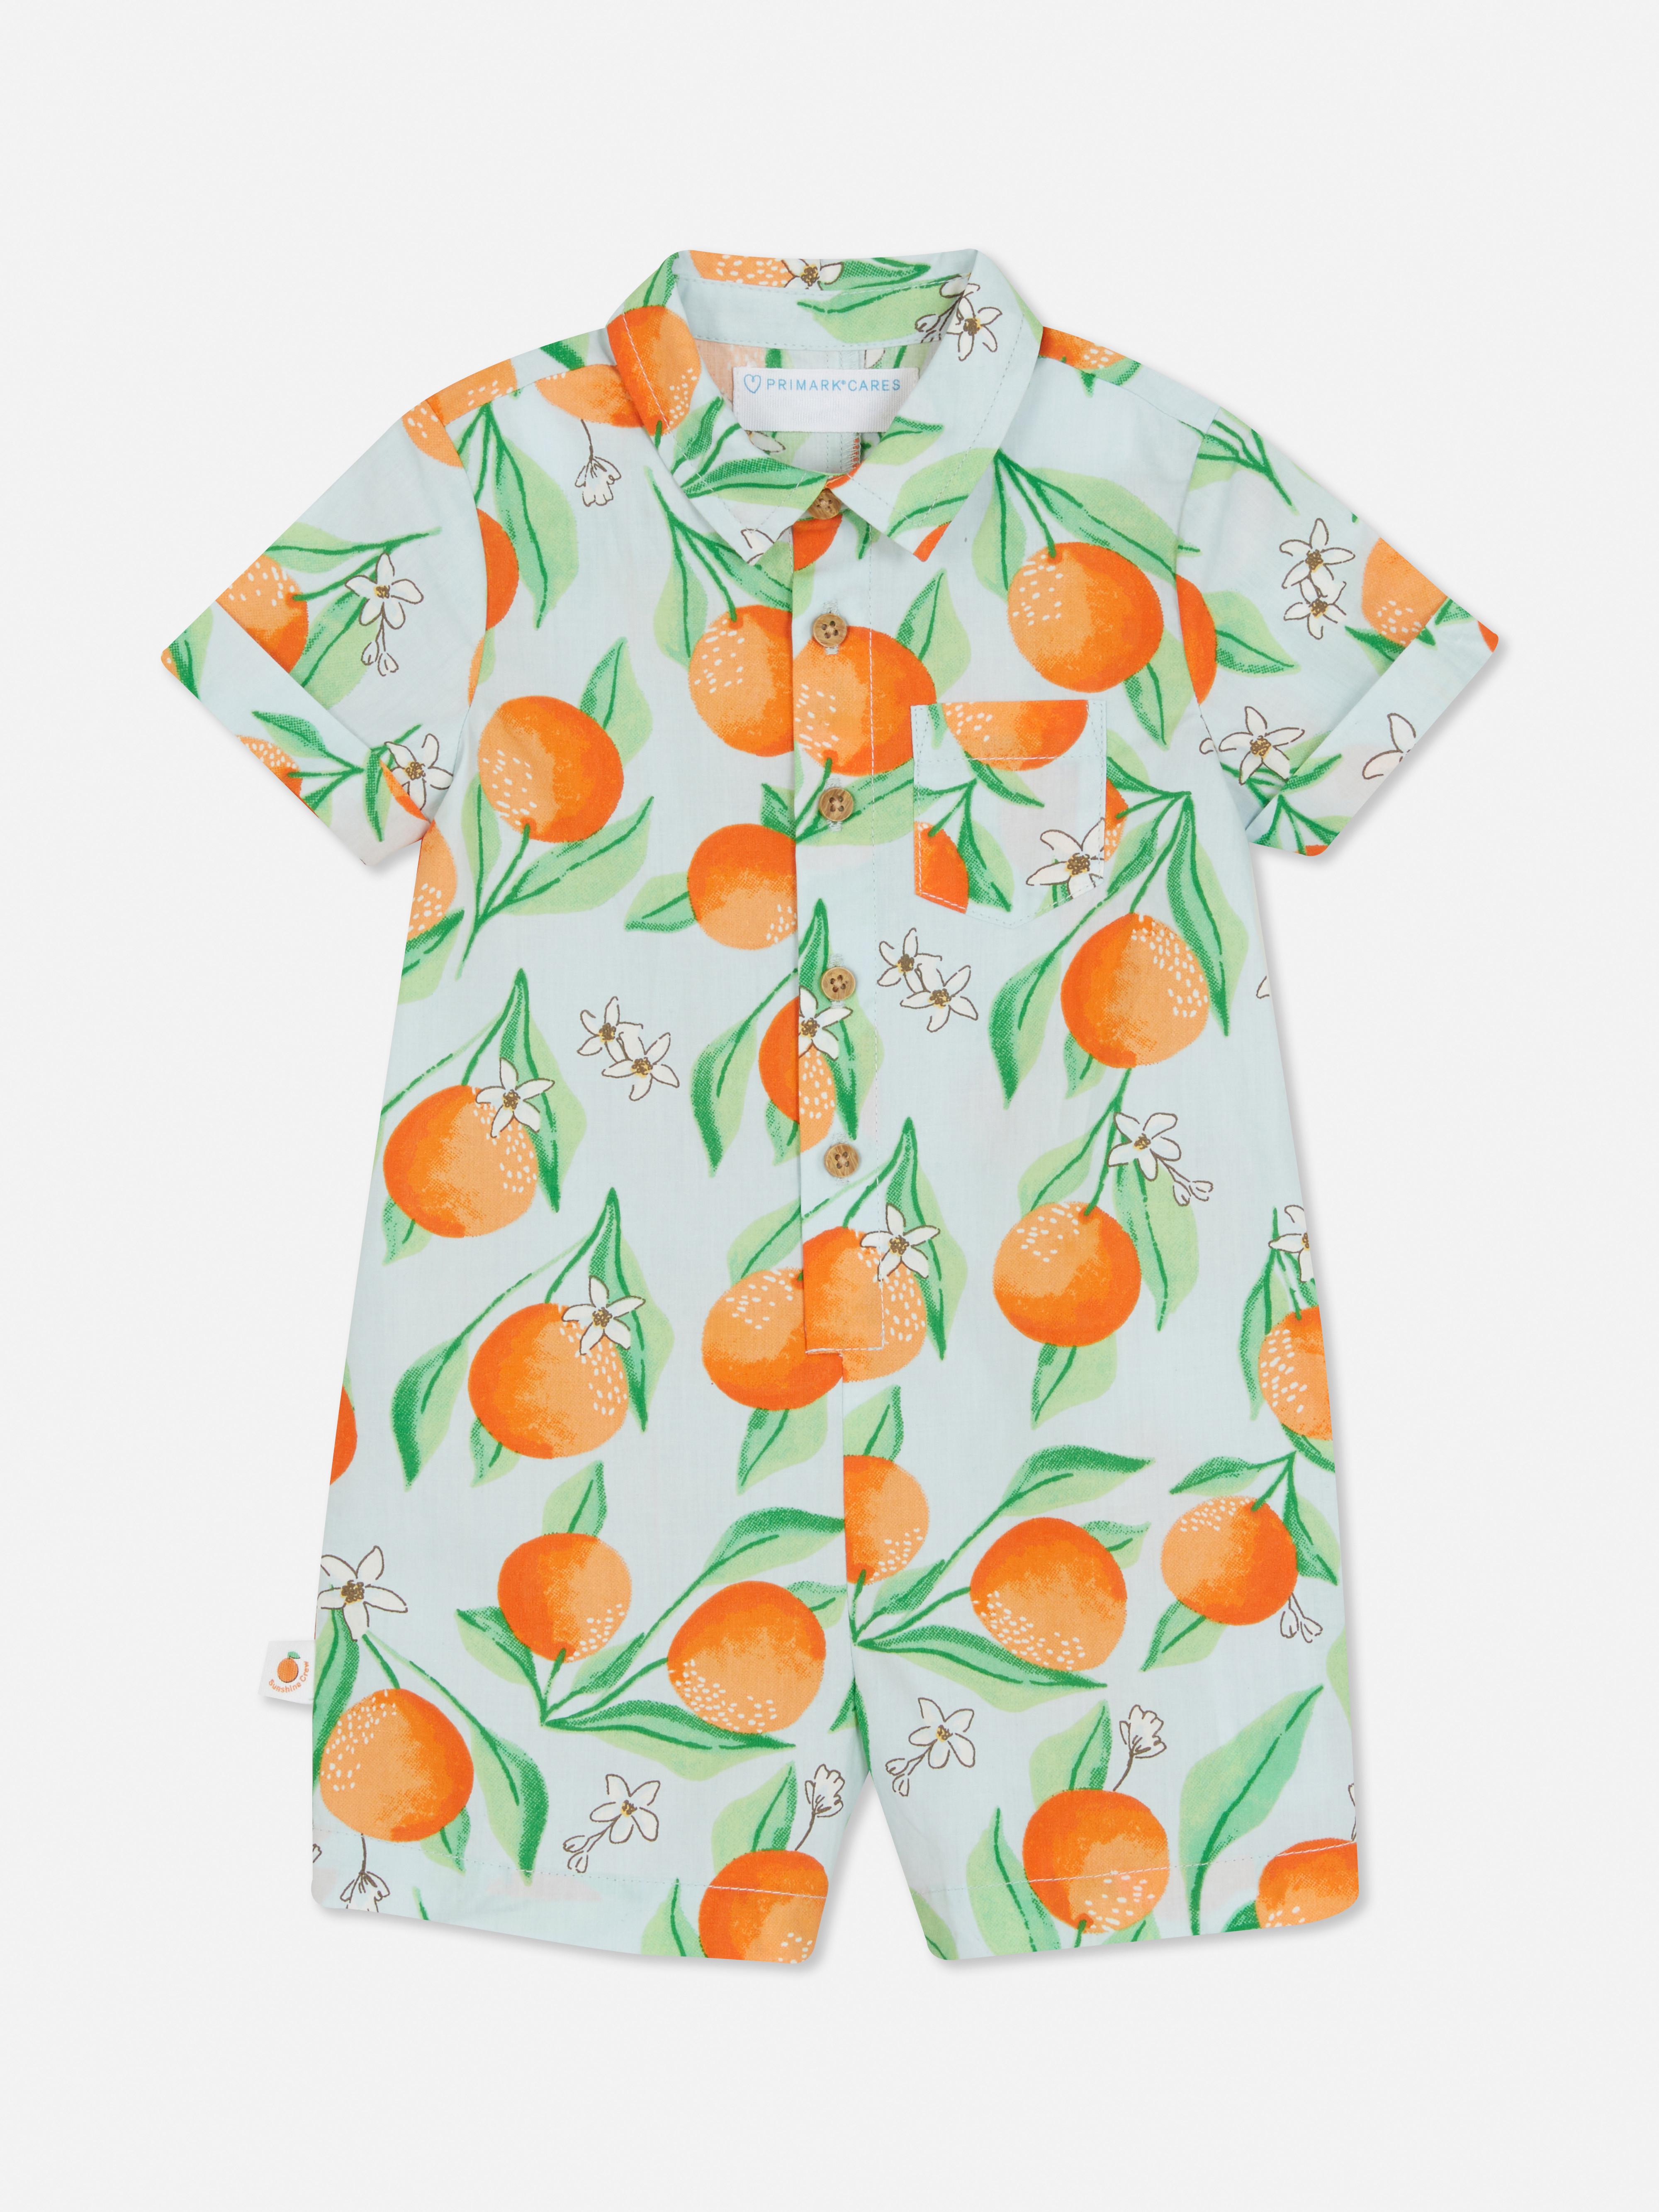 Stacey Solomon Printed All-In-One Romper